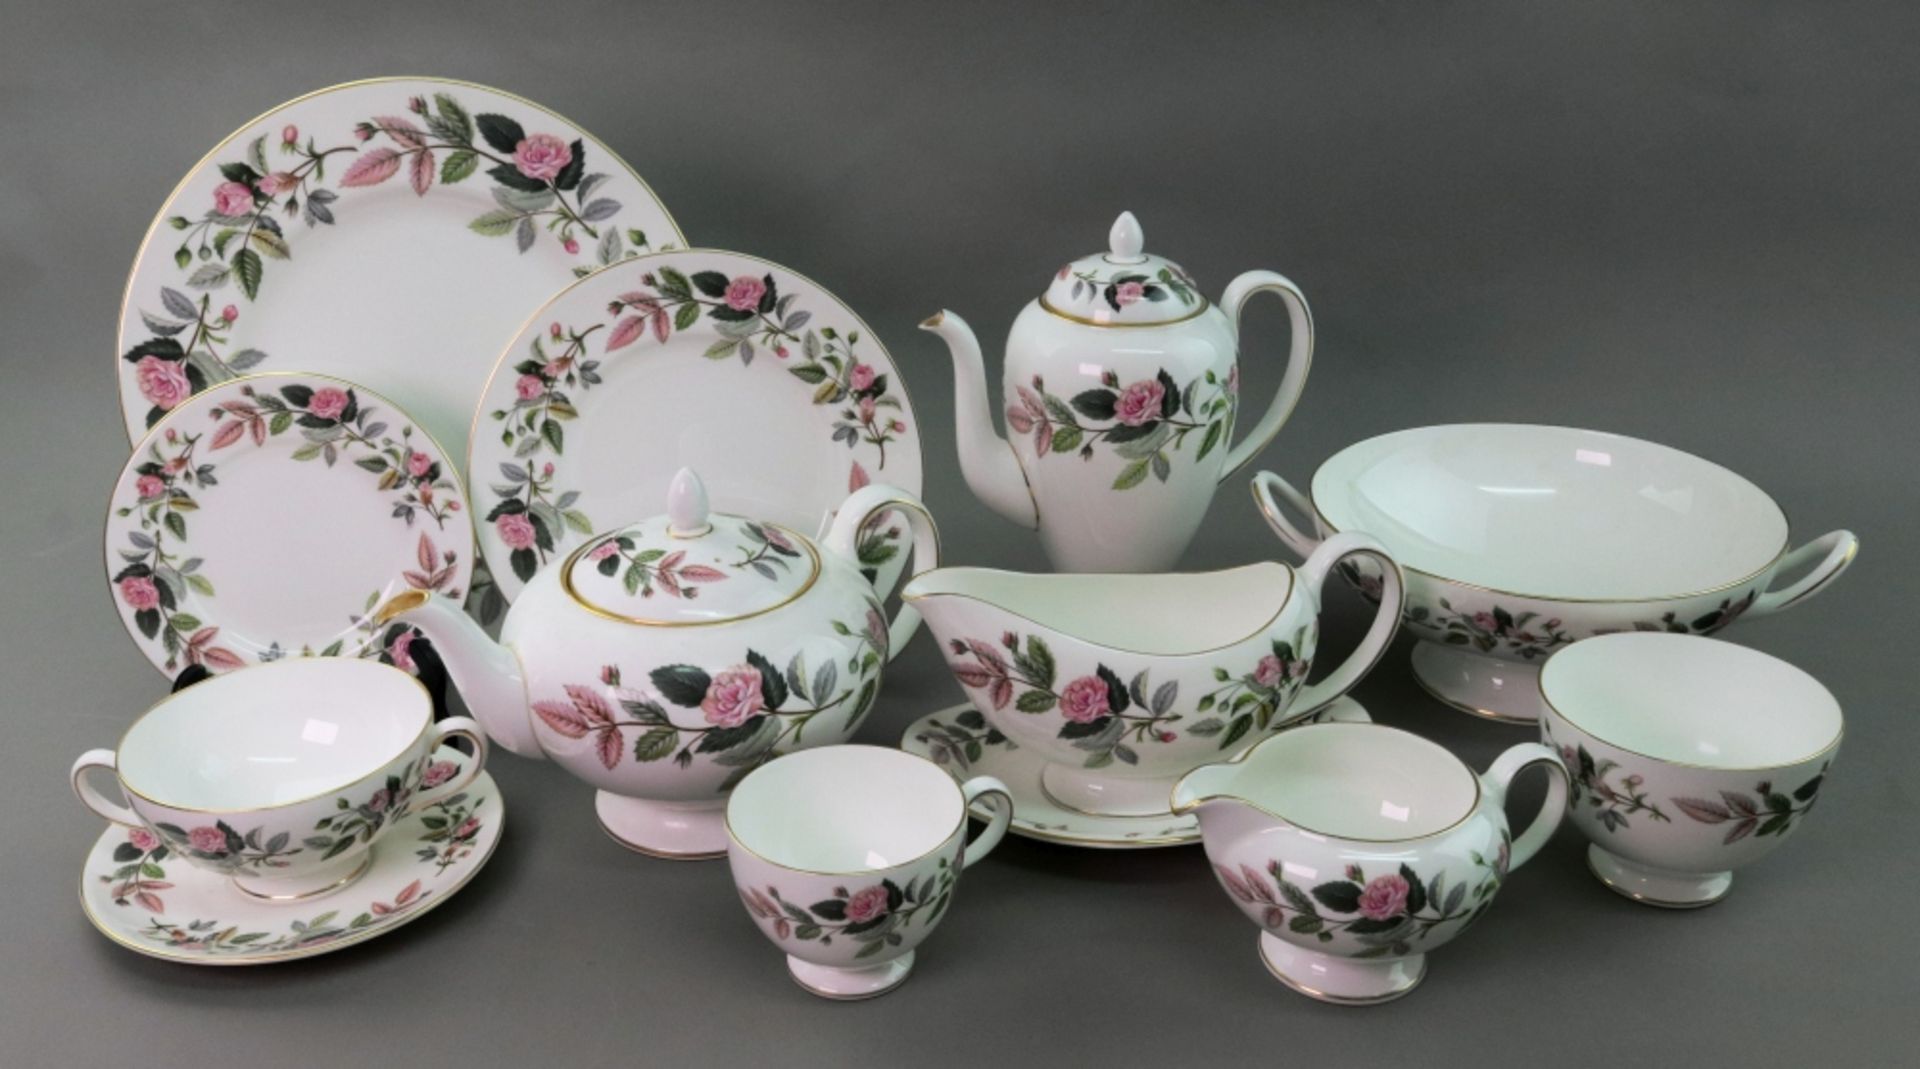 A Wedgwood Hathaway Rose part tea, coffee and dinner service, 79 pieces.